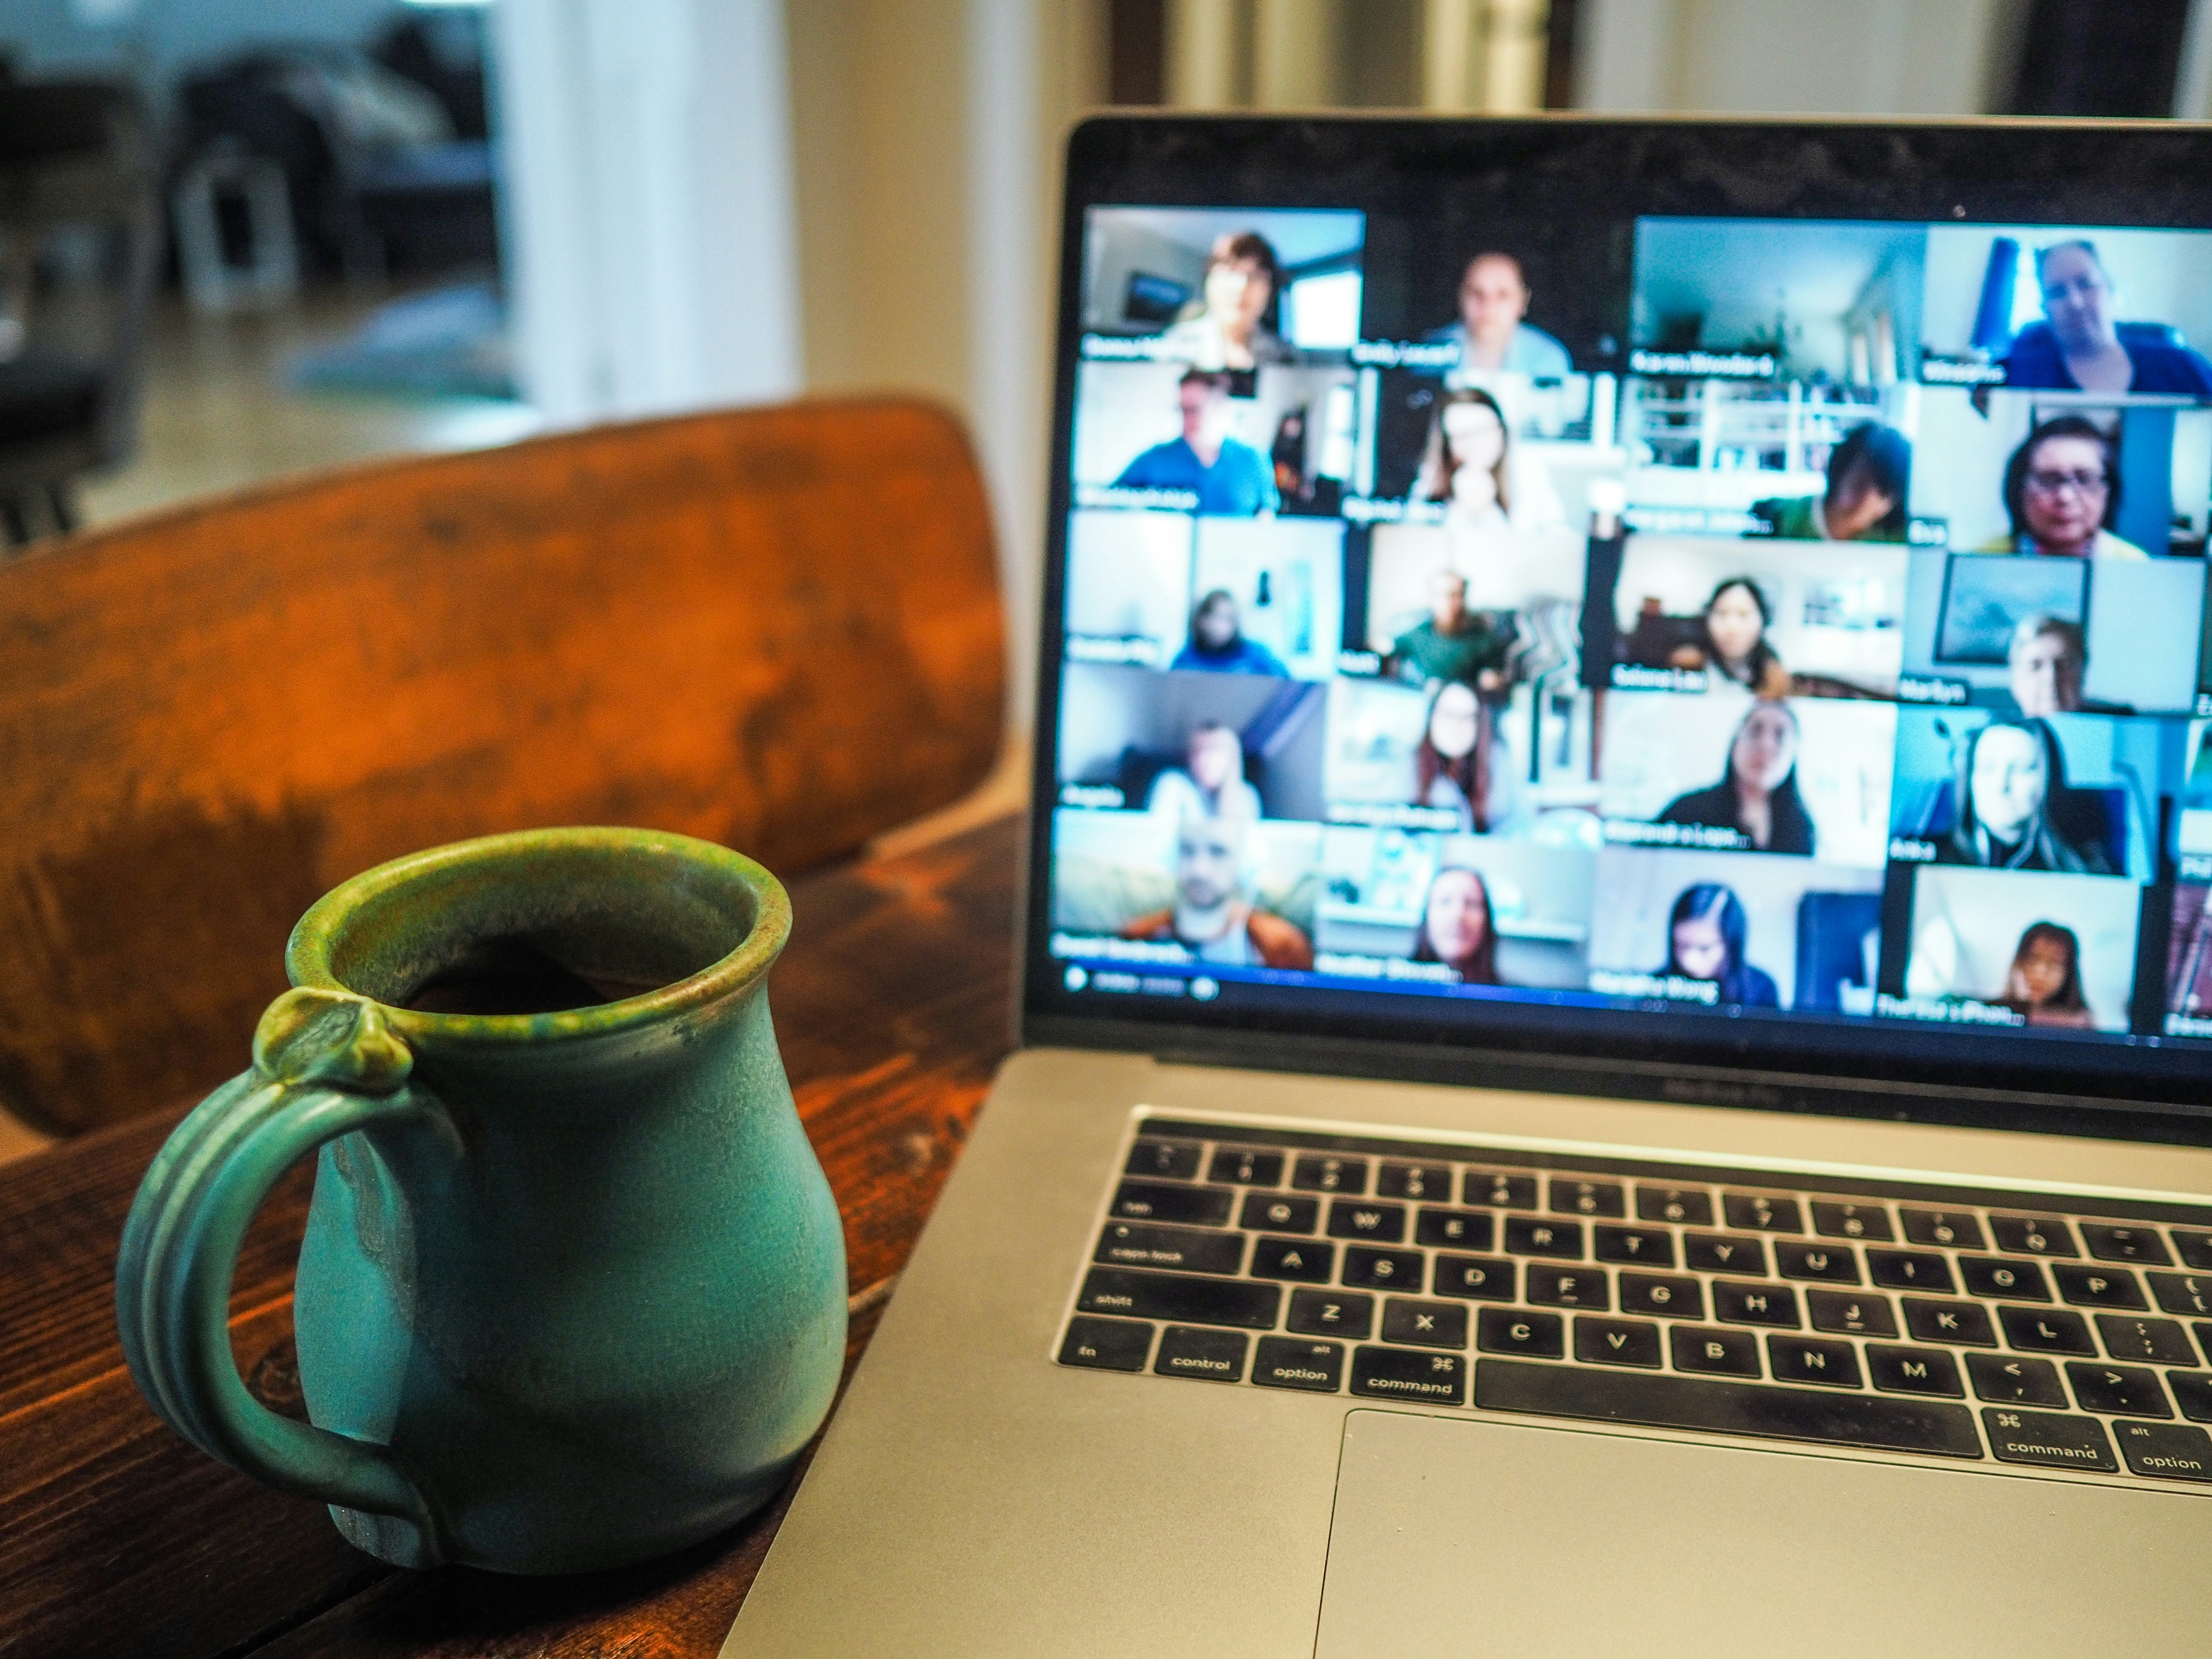 Image of a laptop with multiple people on a video call next to a coffee mug